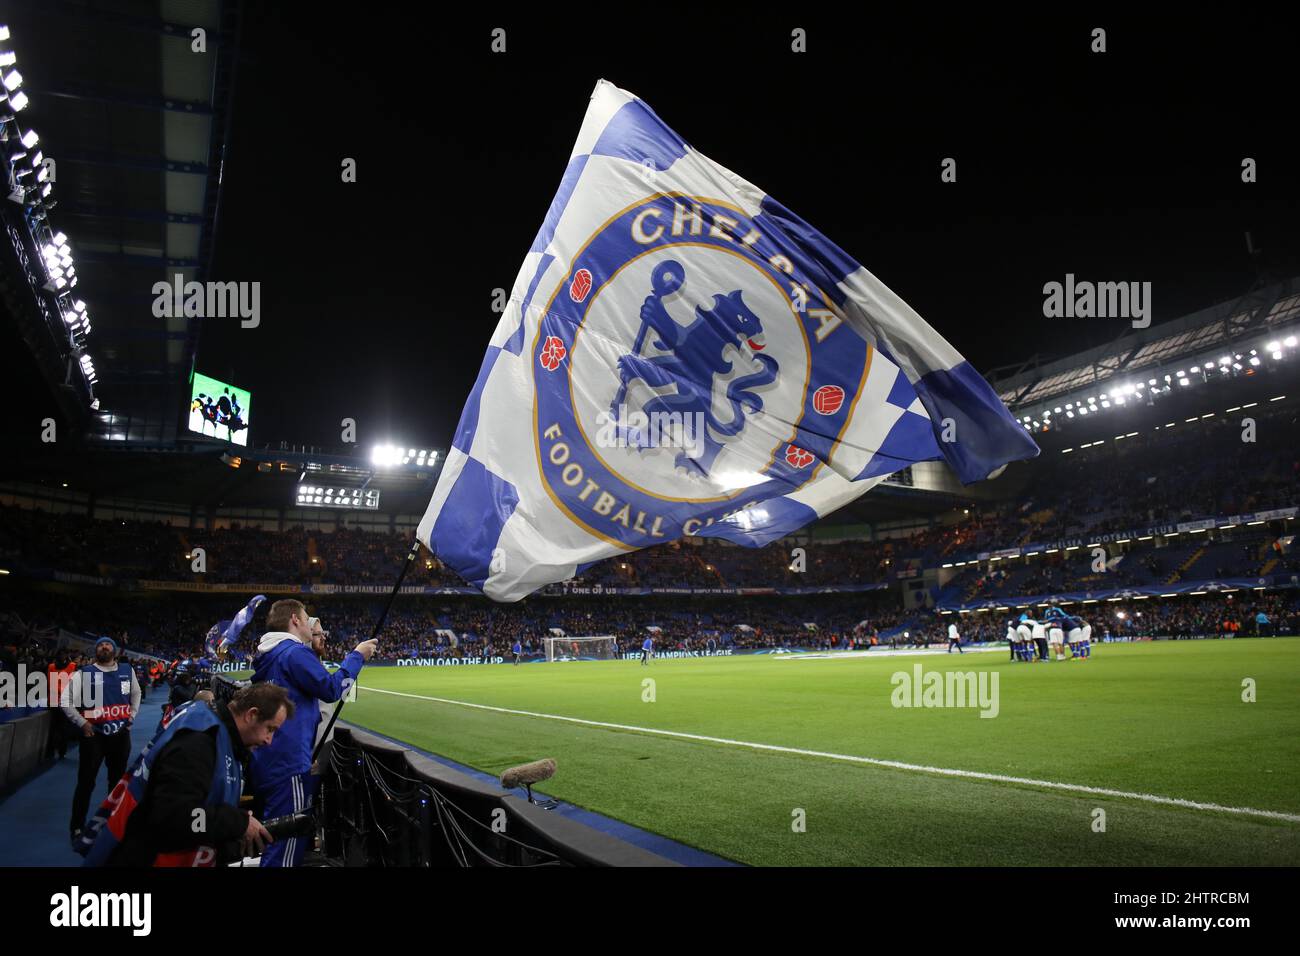 Chelseaflag is waved before  the UEFA Champions League match between Chelsea and FC Porto at Stamford Bridge in London. December 9, 2015. James Boardman / Telephoto Images +44 7967 642437 Stock Photo